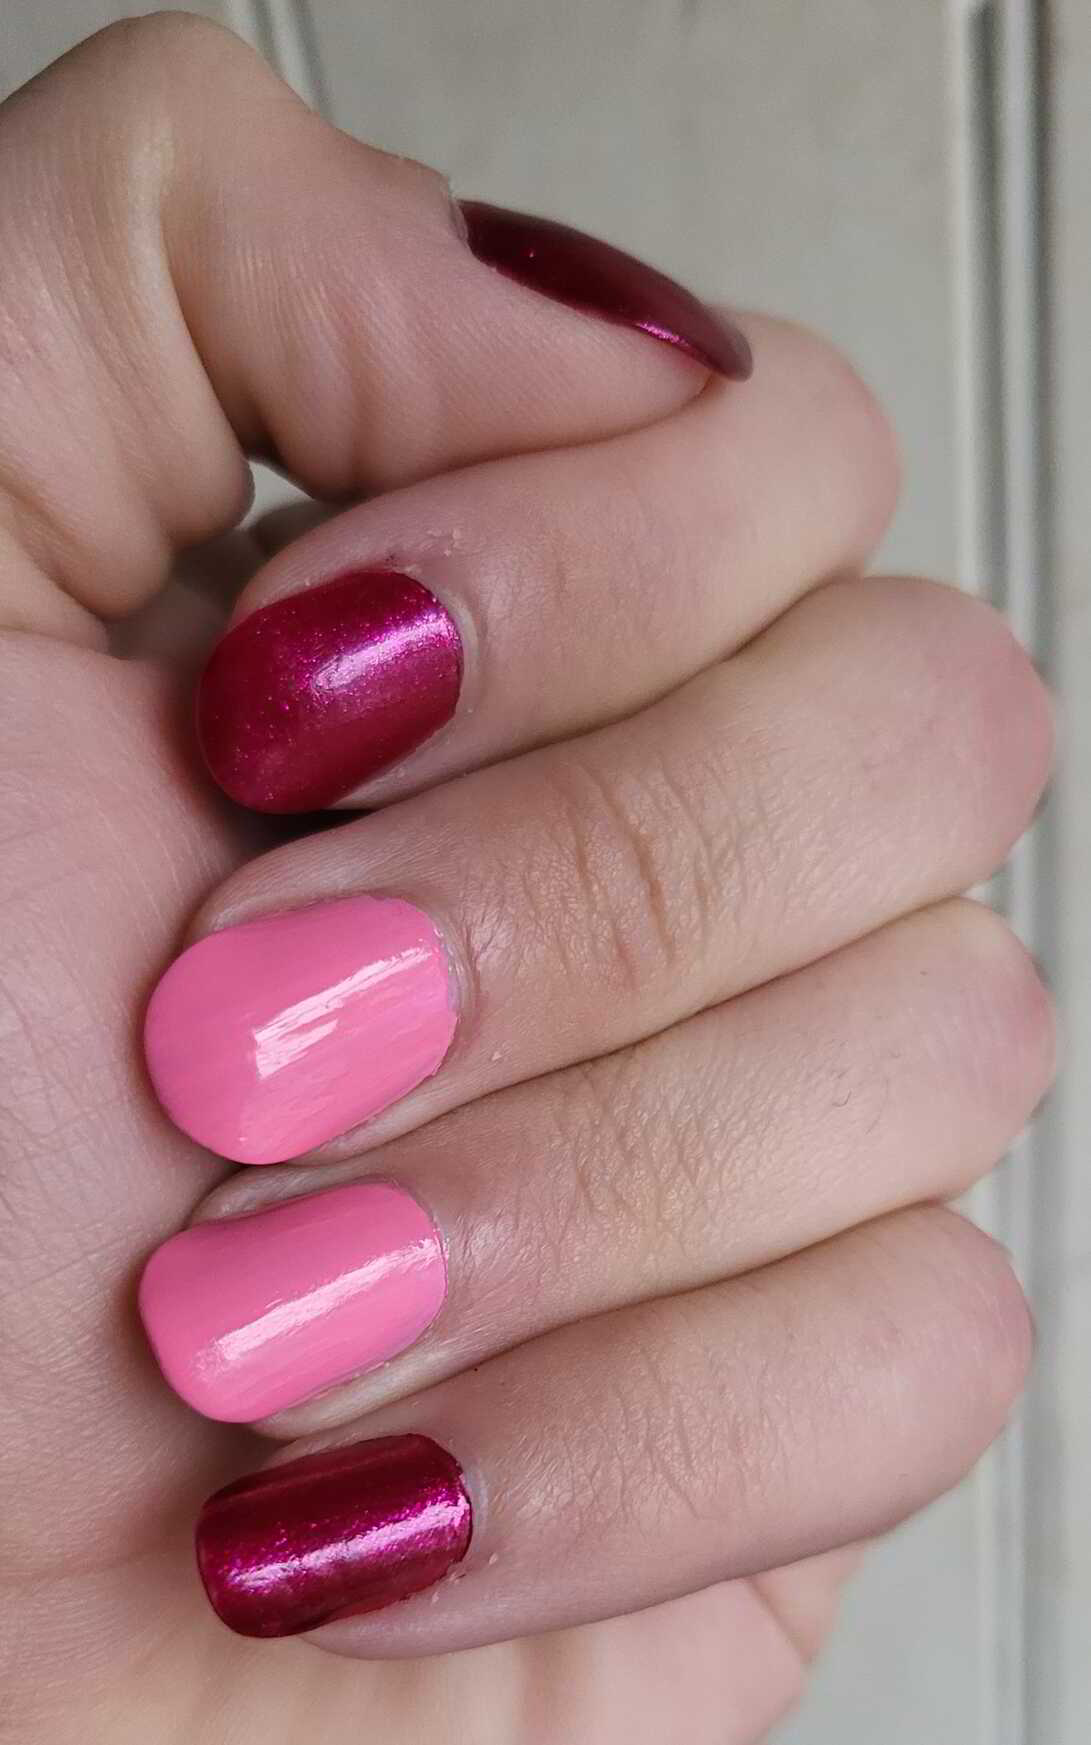 Nail polish manicure of shade OPI The One That Got Away, OPI Racing for Pinks,OPI Top Coat